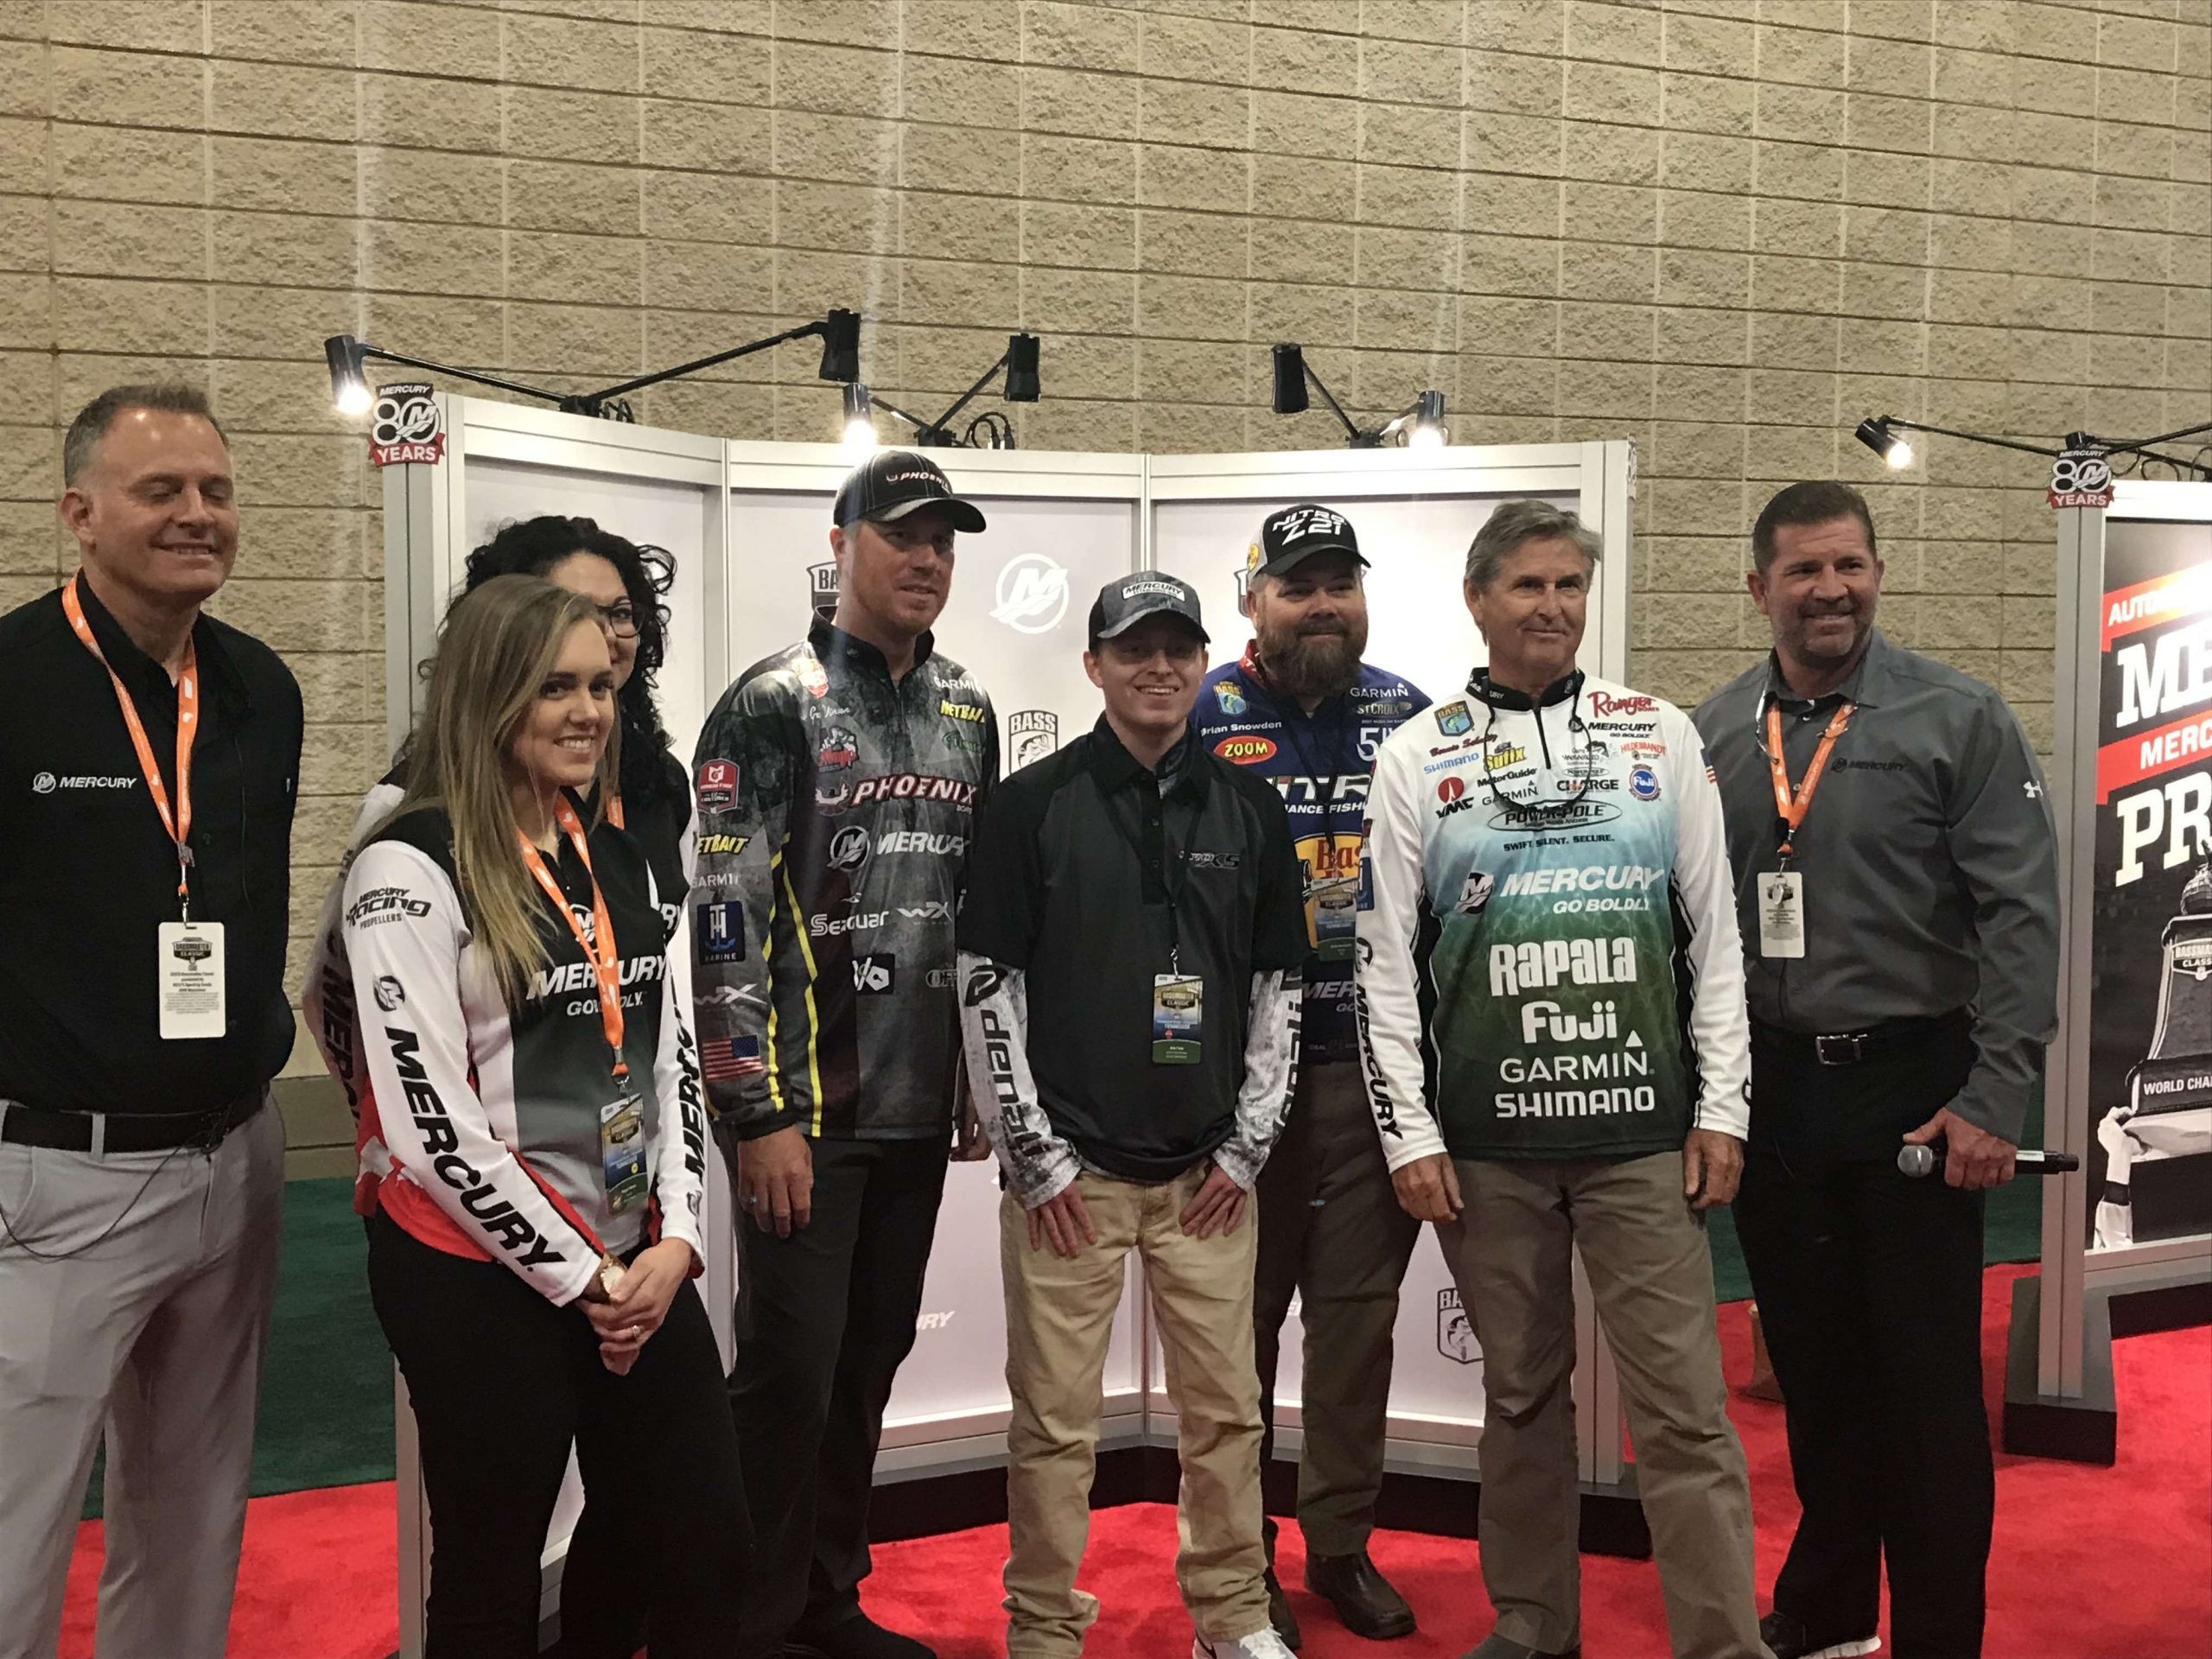 He met with Mercury pro anglers like Brian Snowden, Bernie Schultz and Greg Vinson.